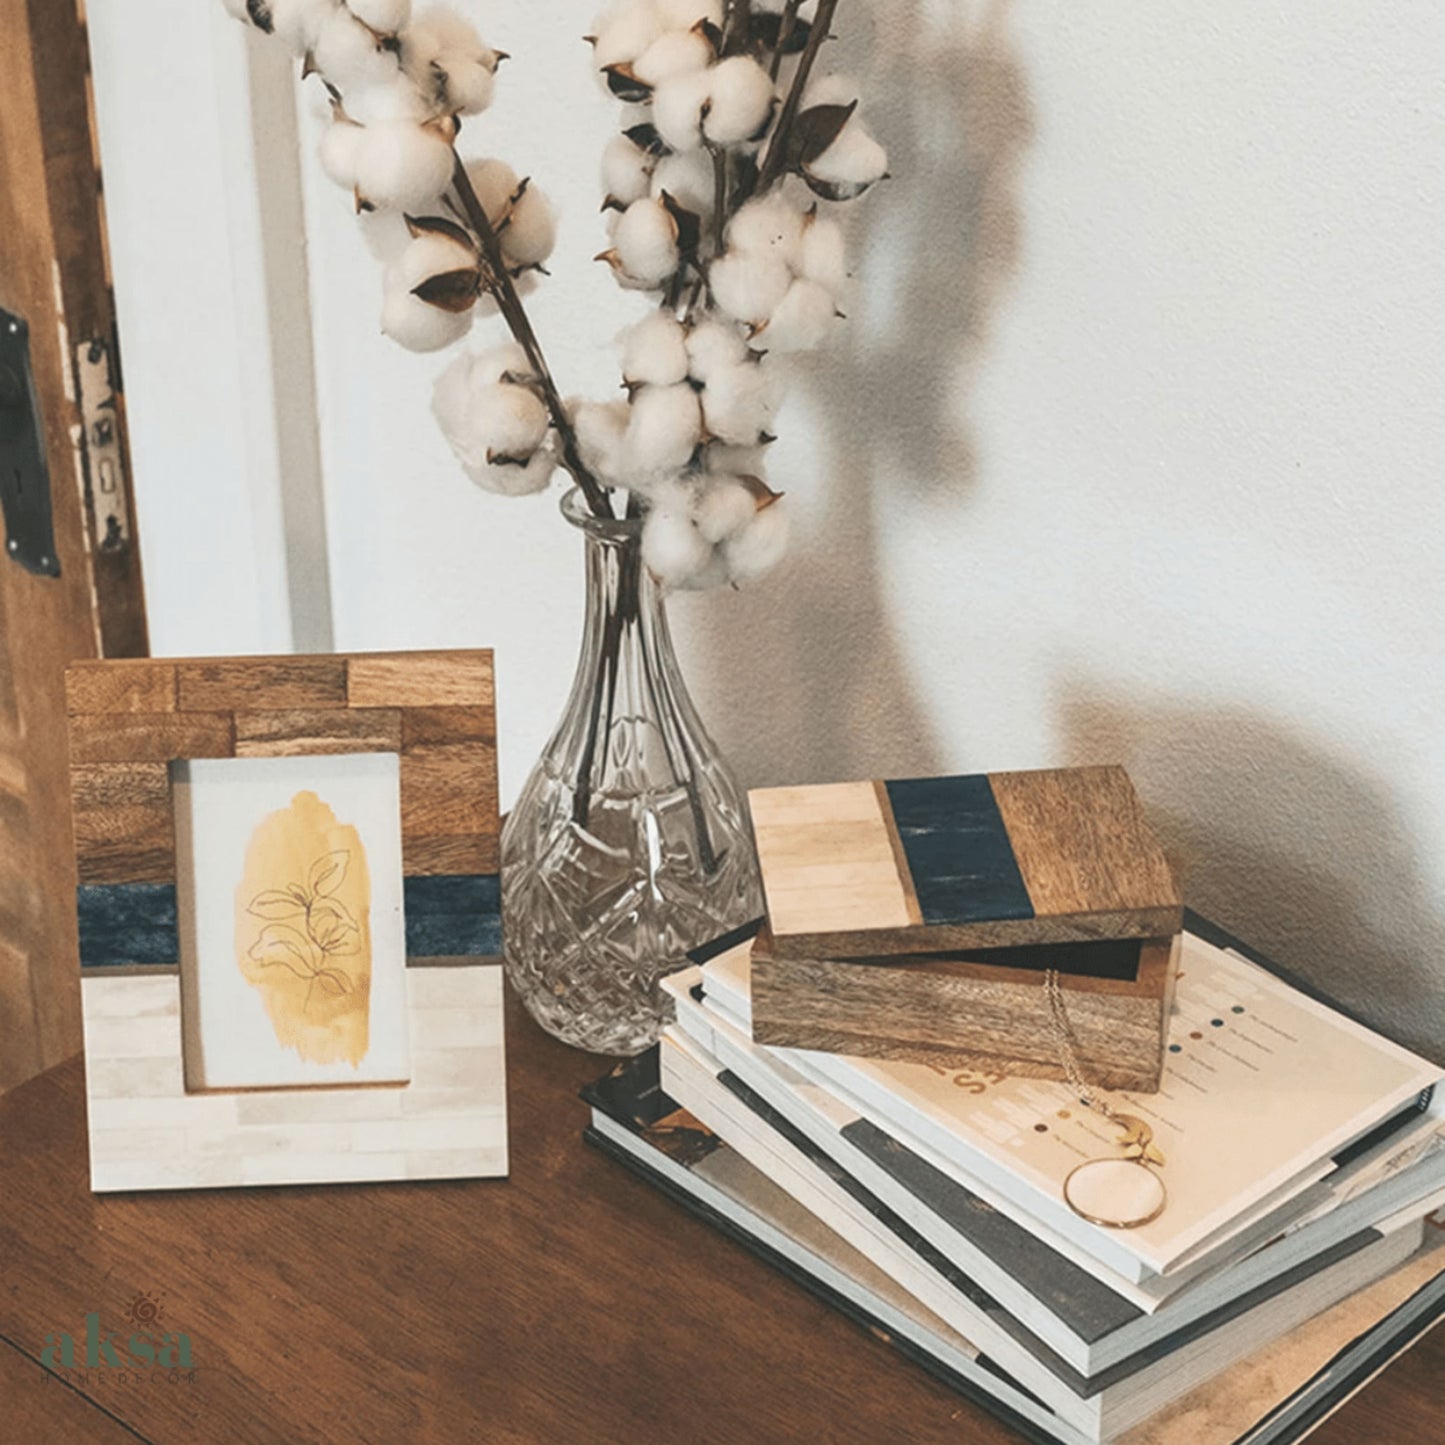 Blue-White-Brown Picture Frame|4x6 Photo|Portrait|Handmade|Sustainable - Aksa Home Decor 